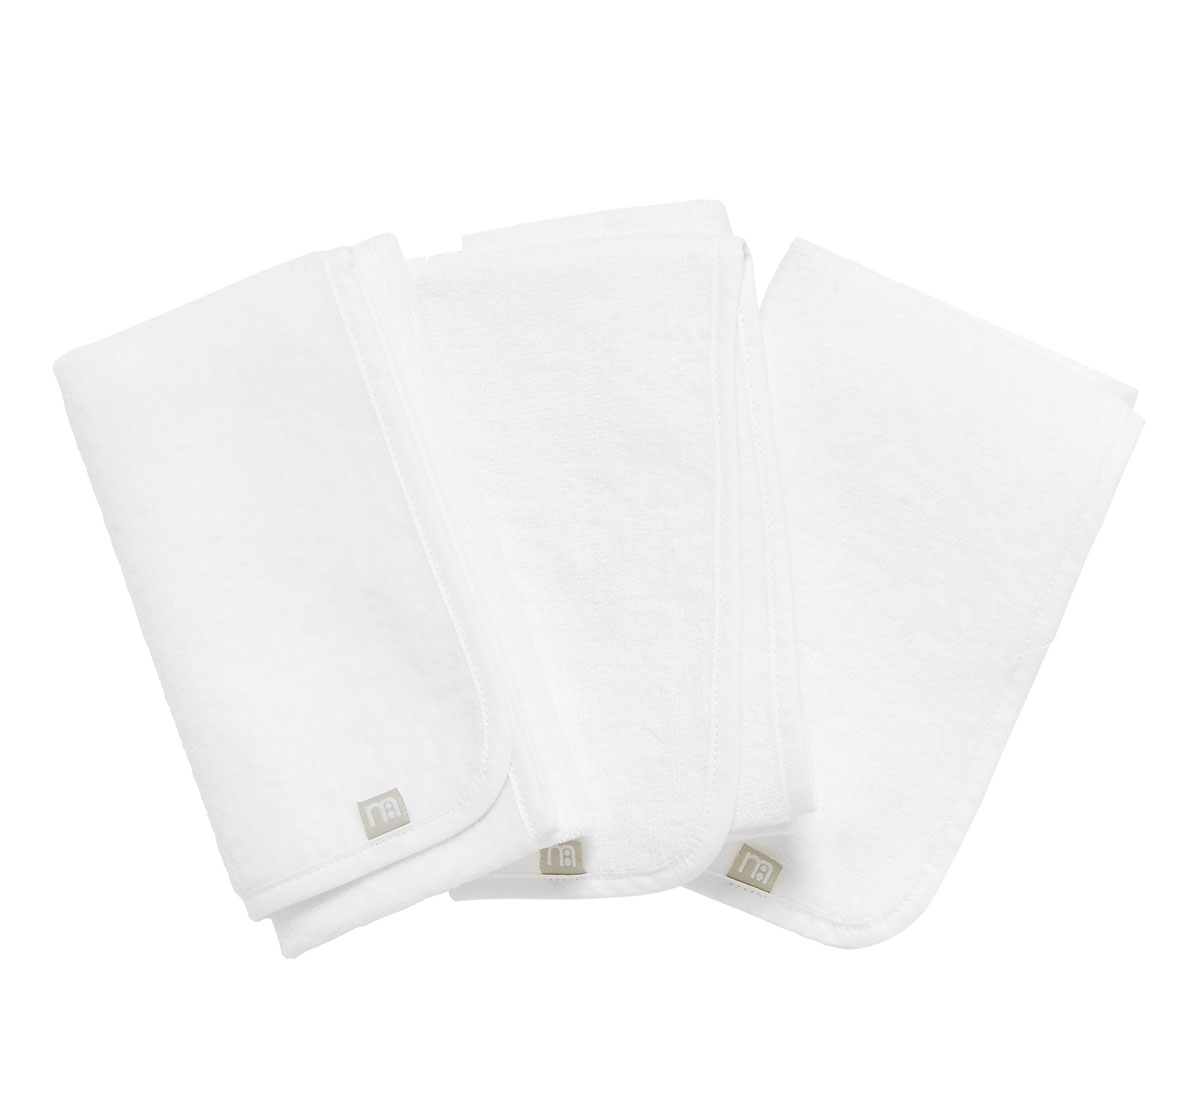 Mothercare | Mothercare Changing Mat Liners Pack of 3 White 0